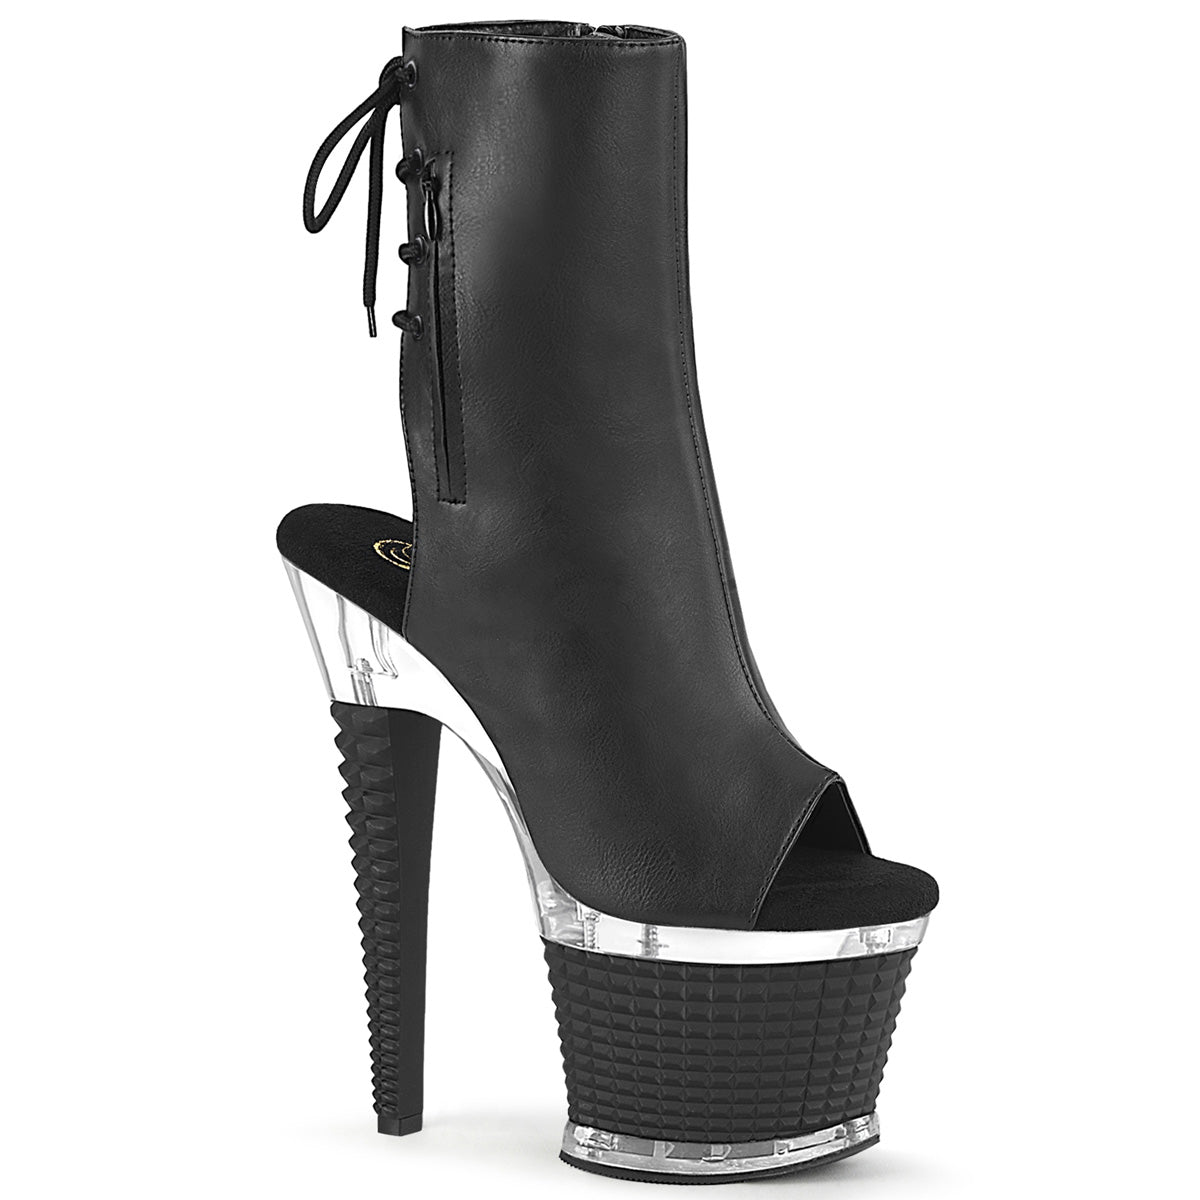 SPECTATOR-1018 Black Faux Leather/Clear Ankle Boot Pleaser